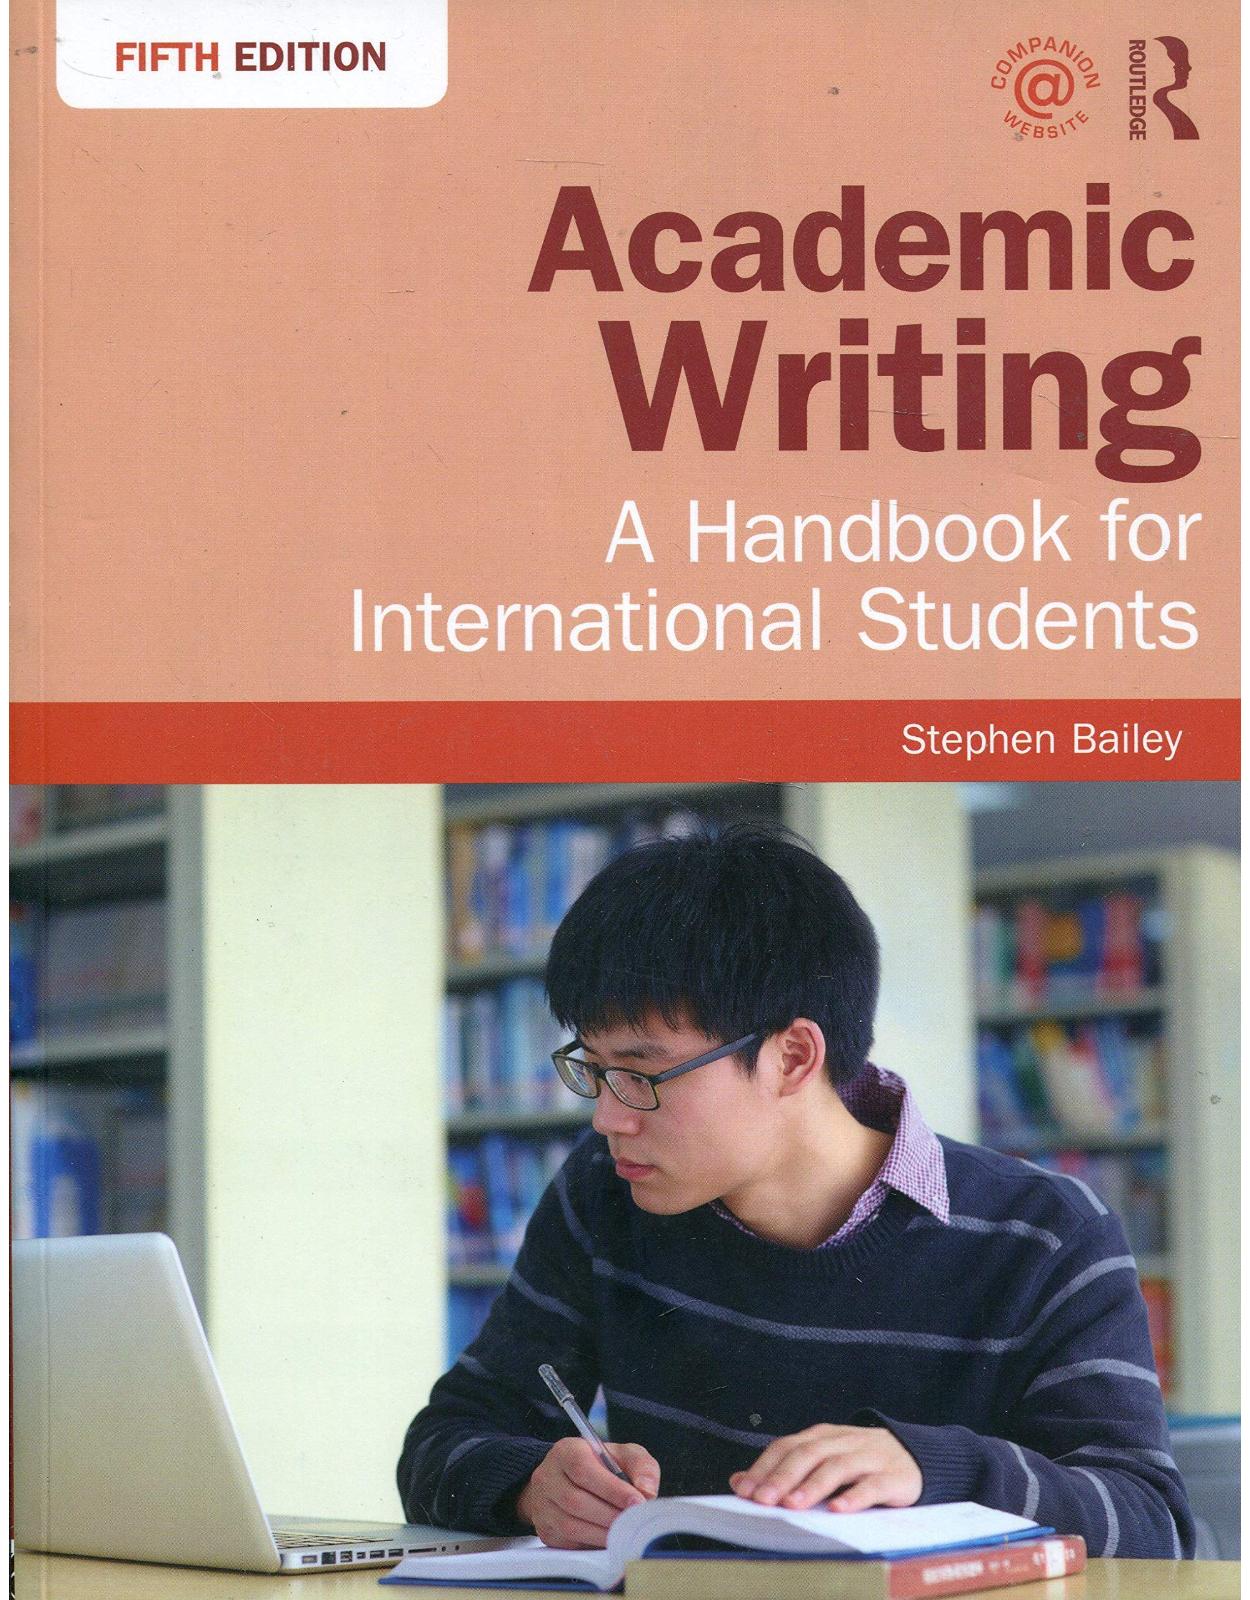 Academic Writing : A Handbook for International Students, 5th edition